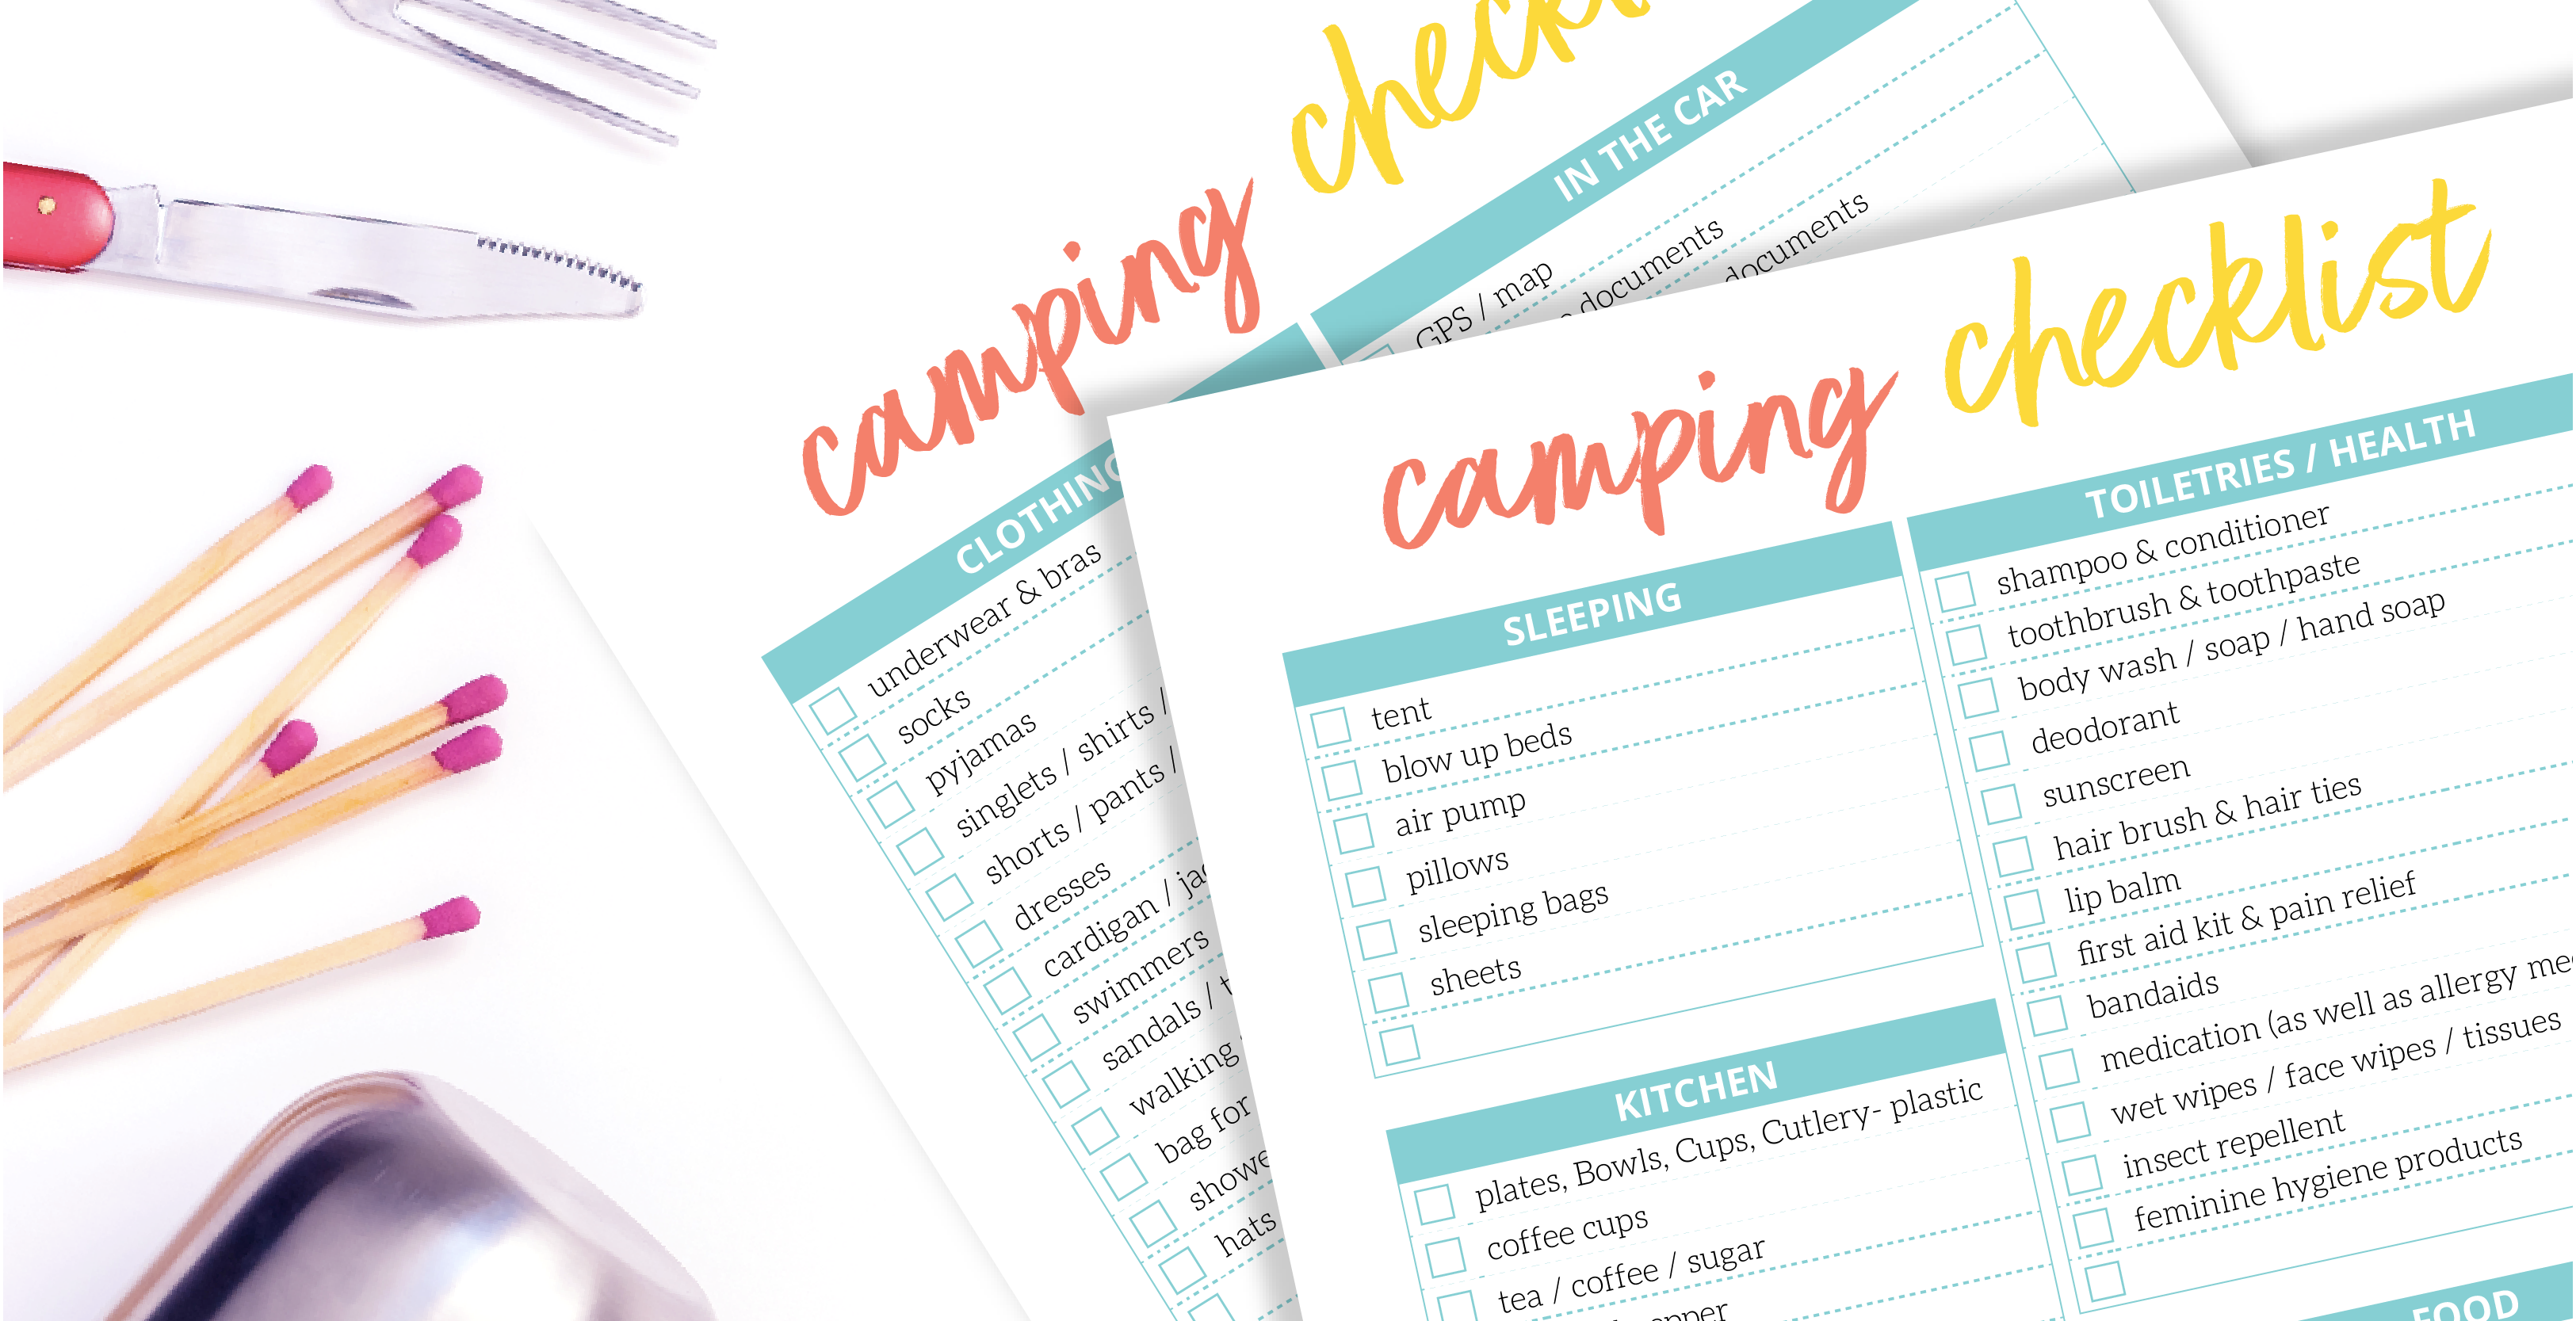 Camping holiday trip checklist by The Organised Housewife